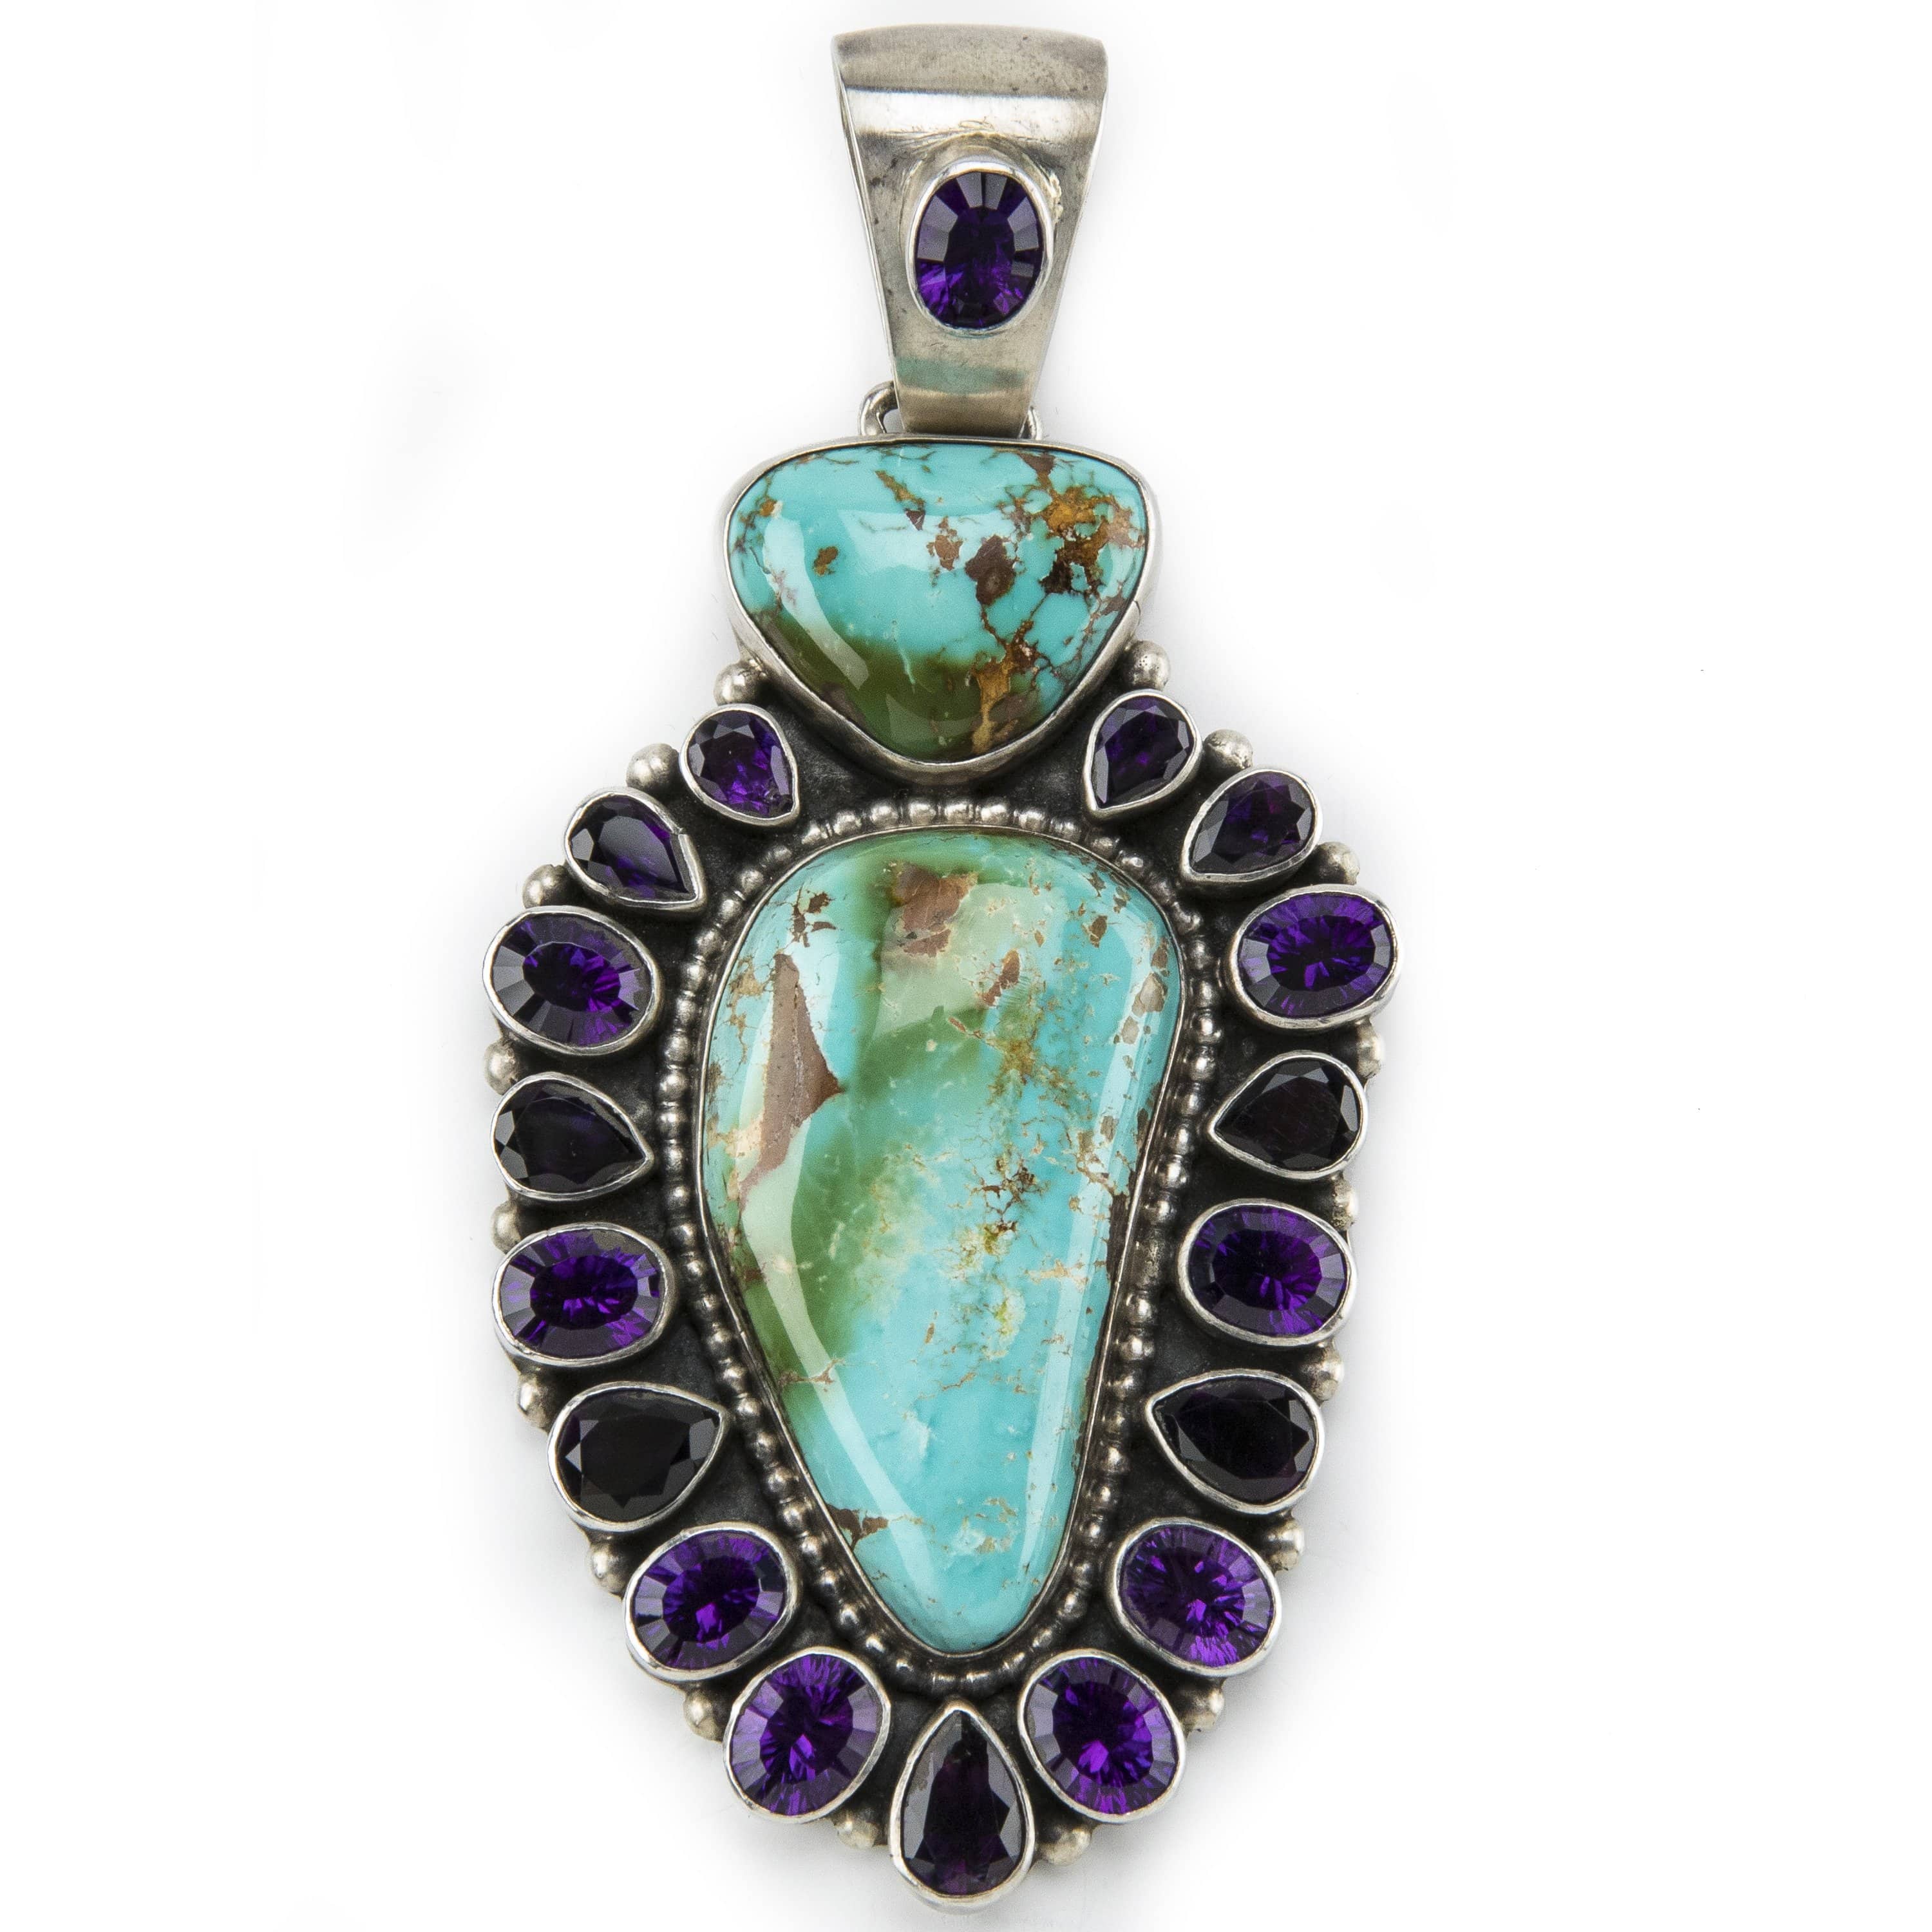 Kalifano Native American Jewelry Royston Turquoise USA Native American Made 925 Sterling Silver Pendant NAN6000.002